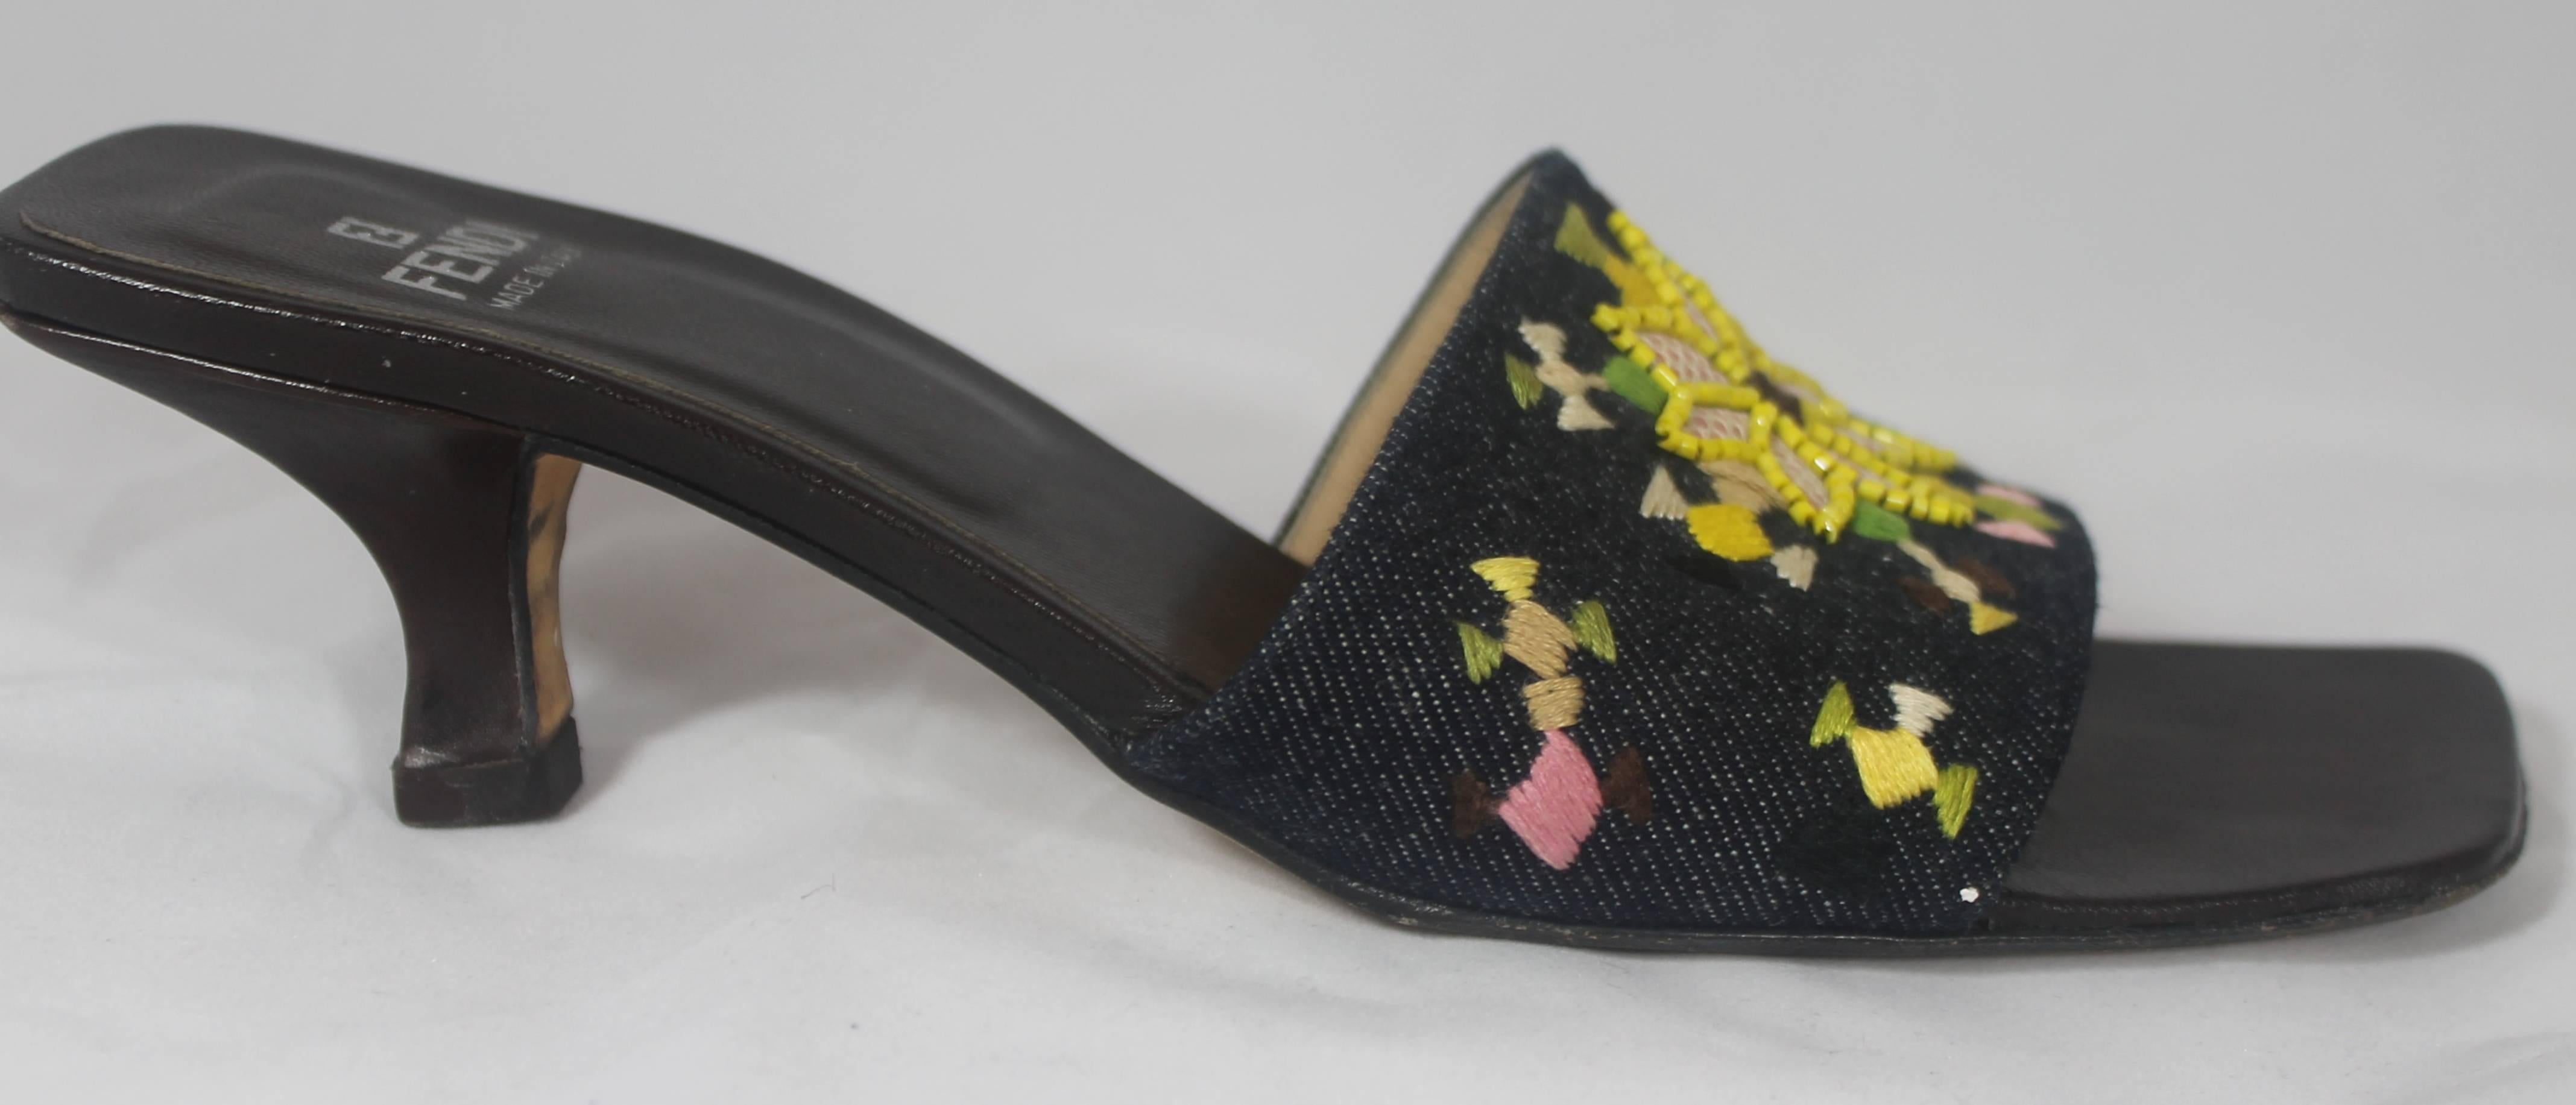 Fendi Denim Slides with Multi-Colored Embroidered and Beaded Design - 7M. These slides have a square toe shape and a band over the top of the foot. The band is denim colored and has multi-colored designs on it along with some yellow beading. They